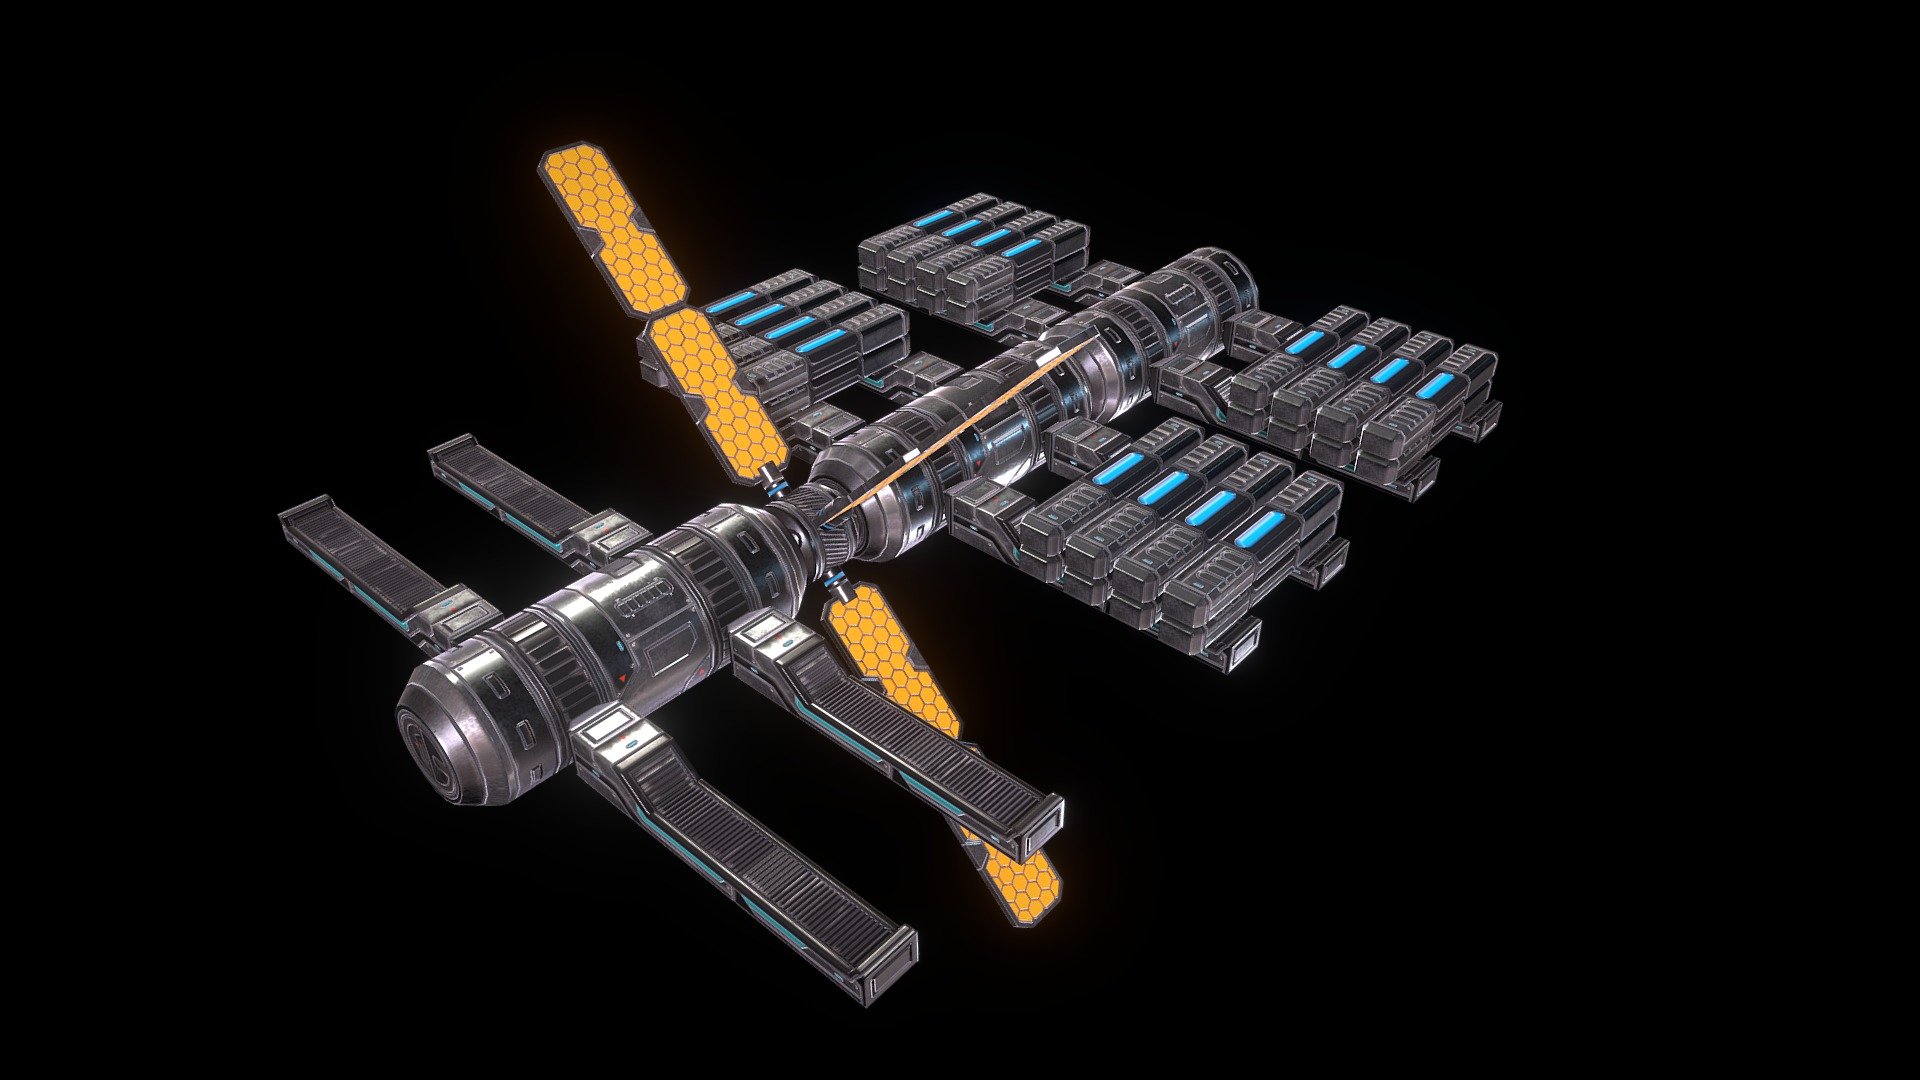 For more information visit: Ebal Studios - Space Stations Creator Modules Assembly - 3D model by Ebal Studios (@EbalStudios) 3d model